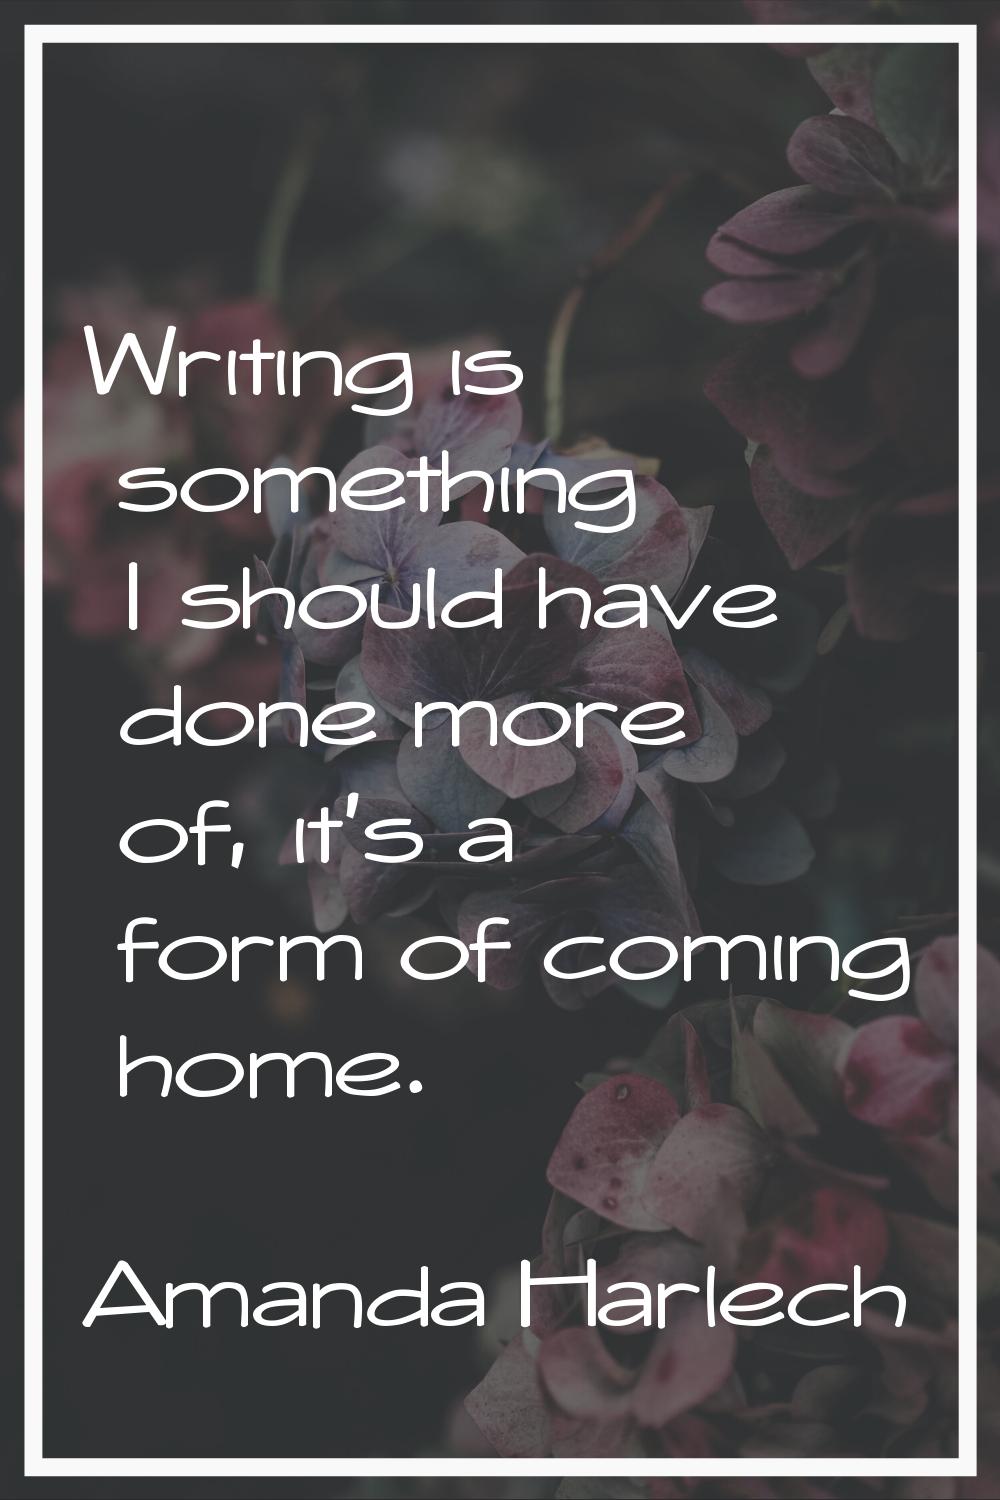 Writing is something I should have done more of, it's a form of coming home.